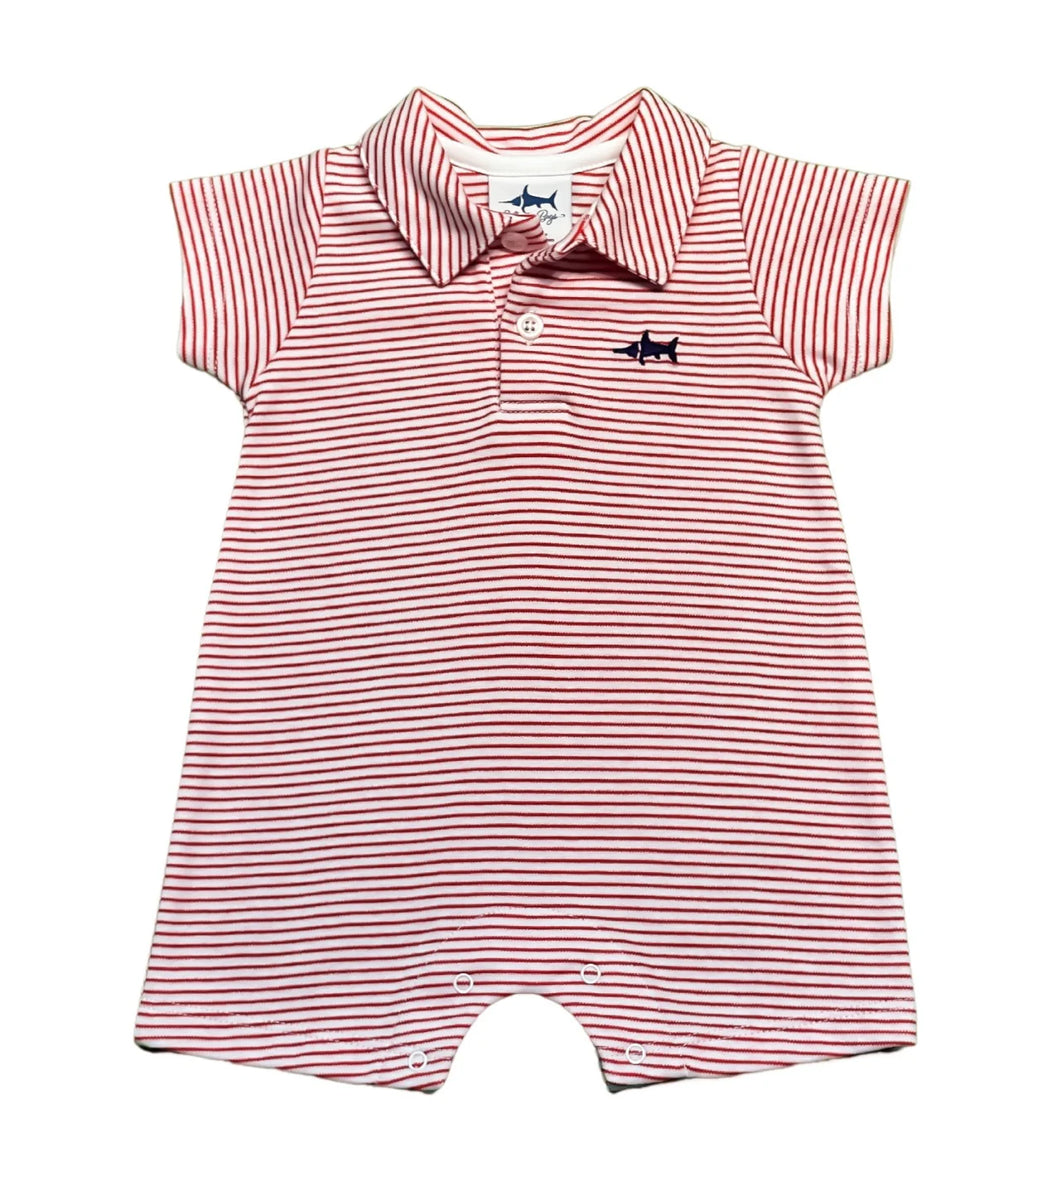 Saltwater Boys Signature Polo Romper - Red/White